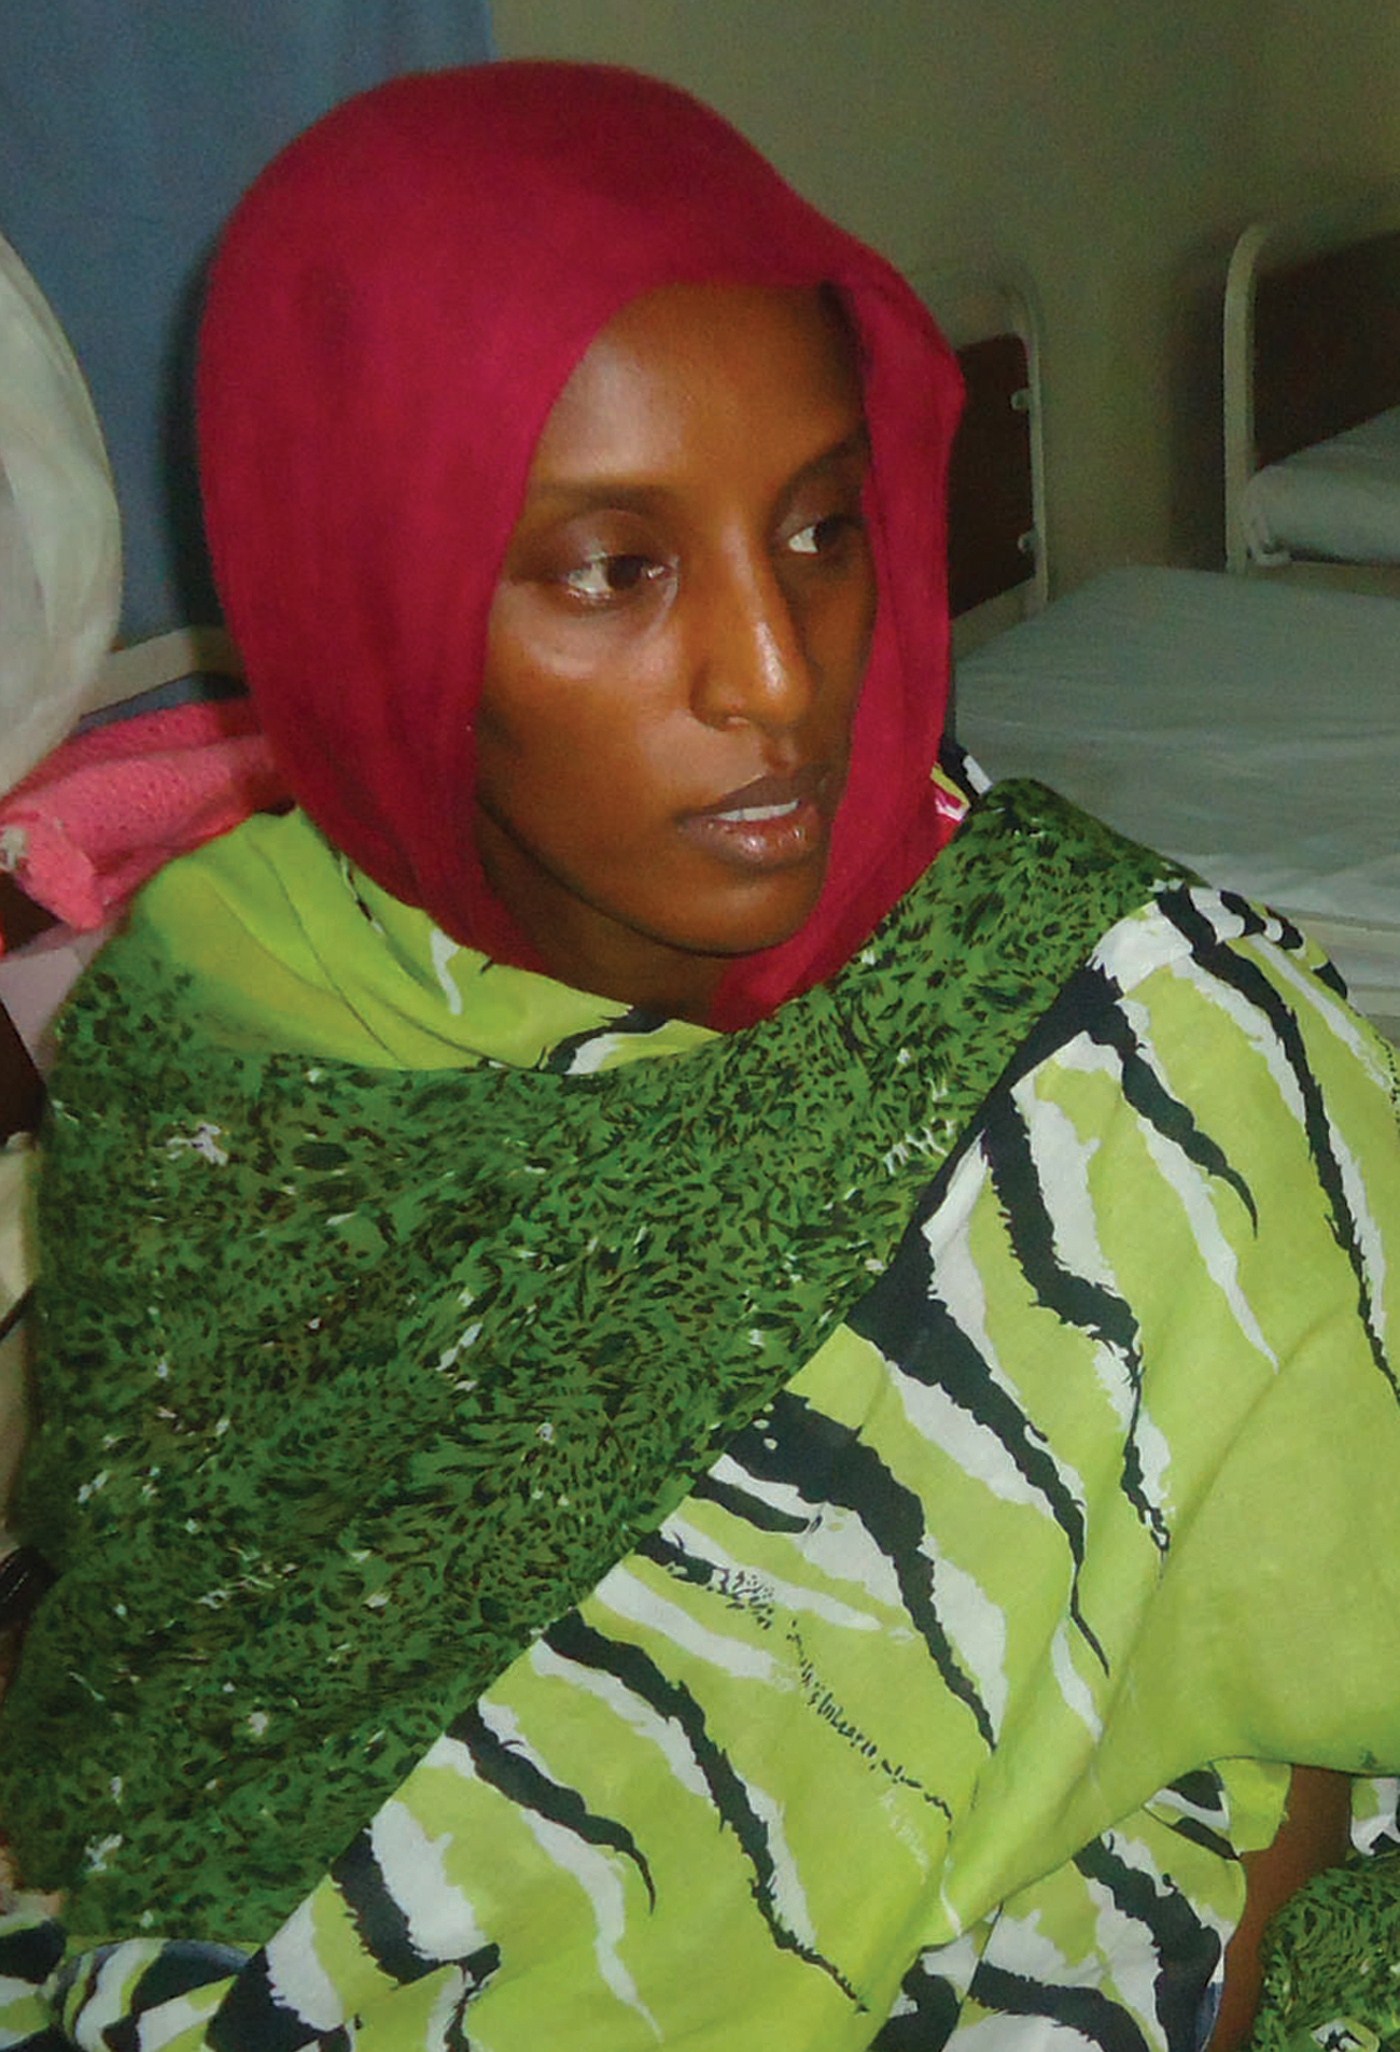 Meriam Ibrahim sits in her cell a day after she gave birth to a baby girl at a women's prison in Omdurman on May 28, 2014.